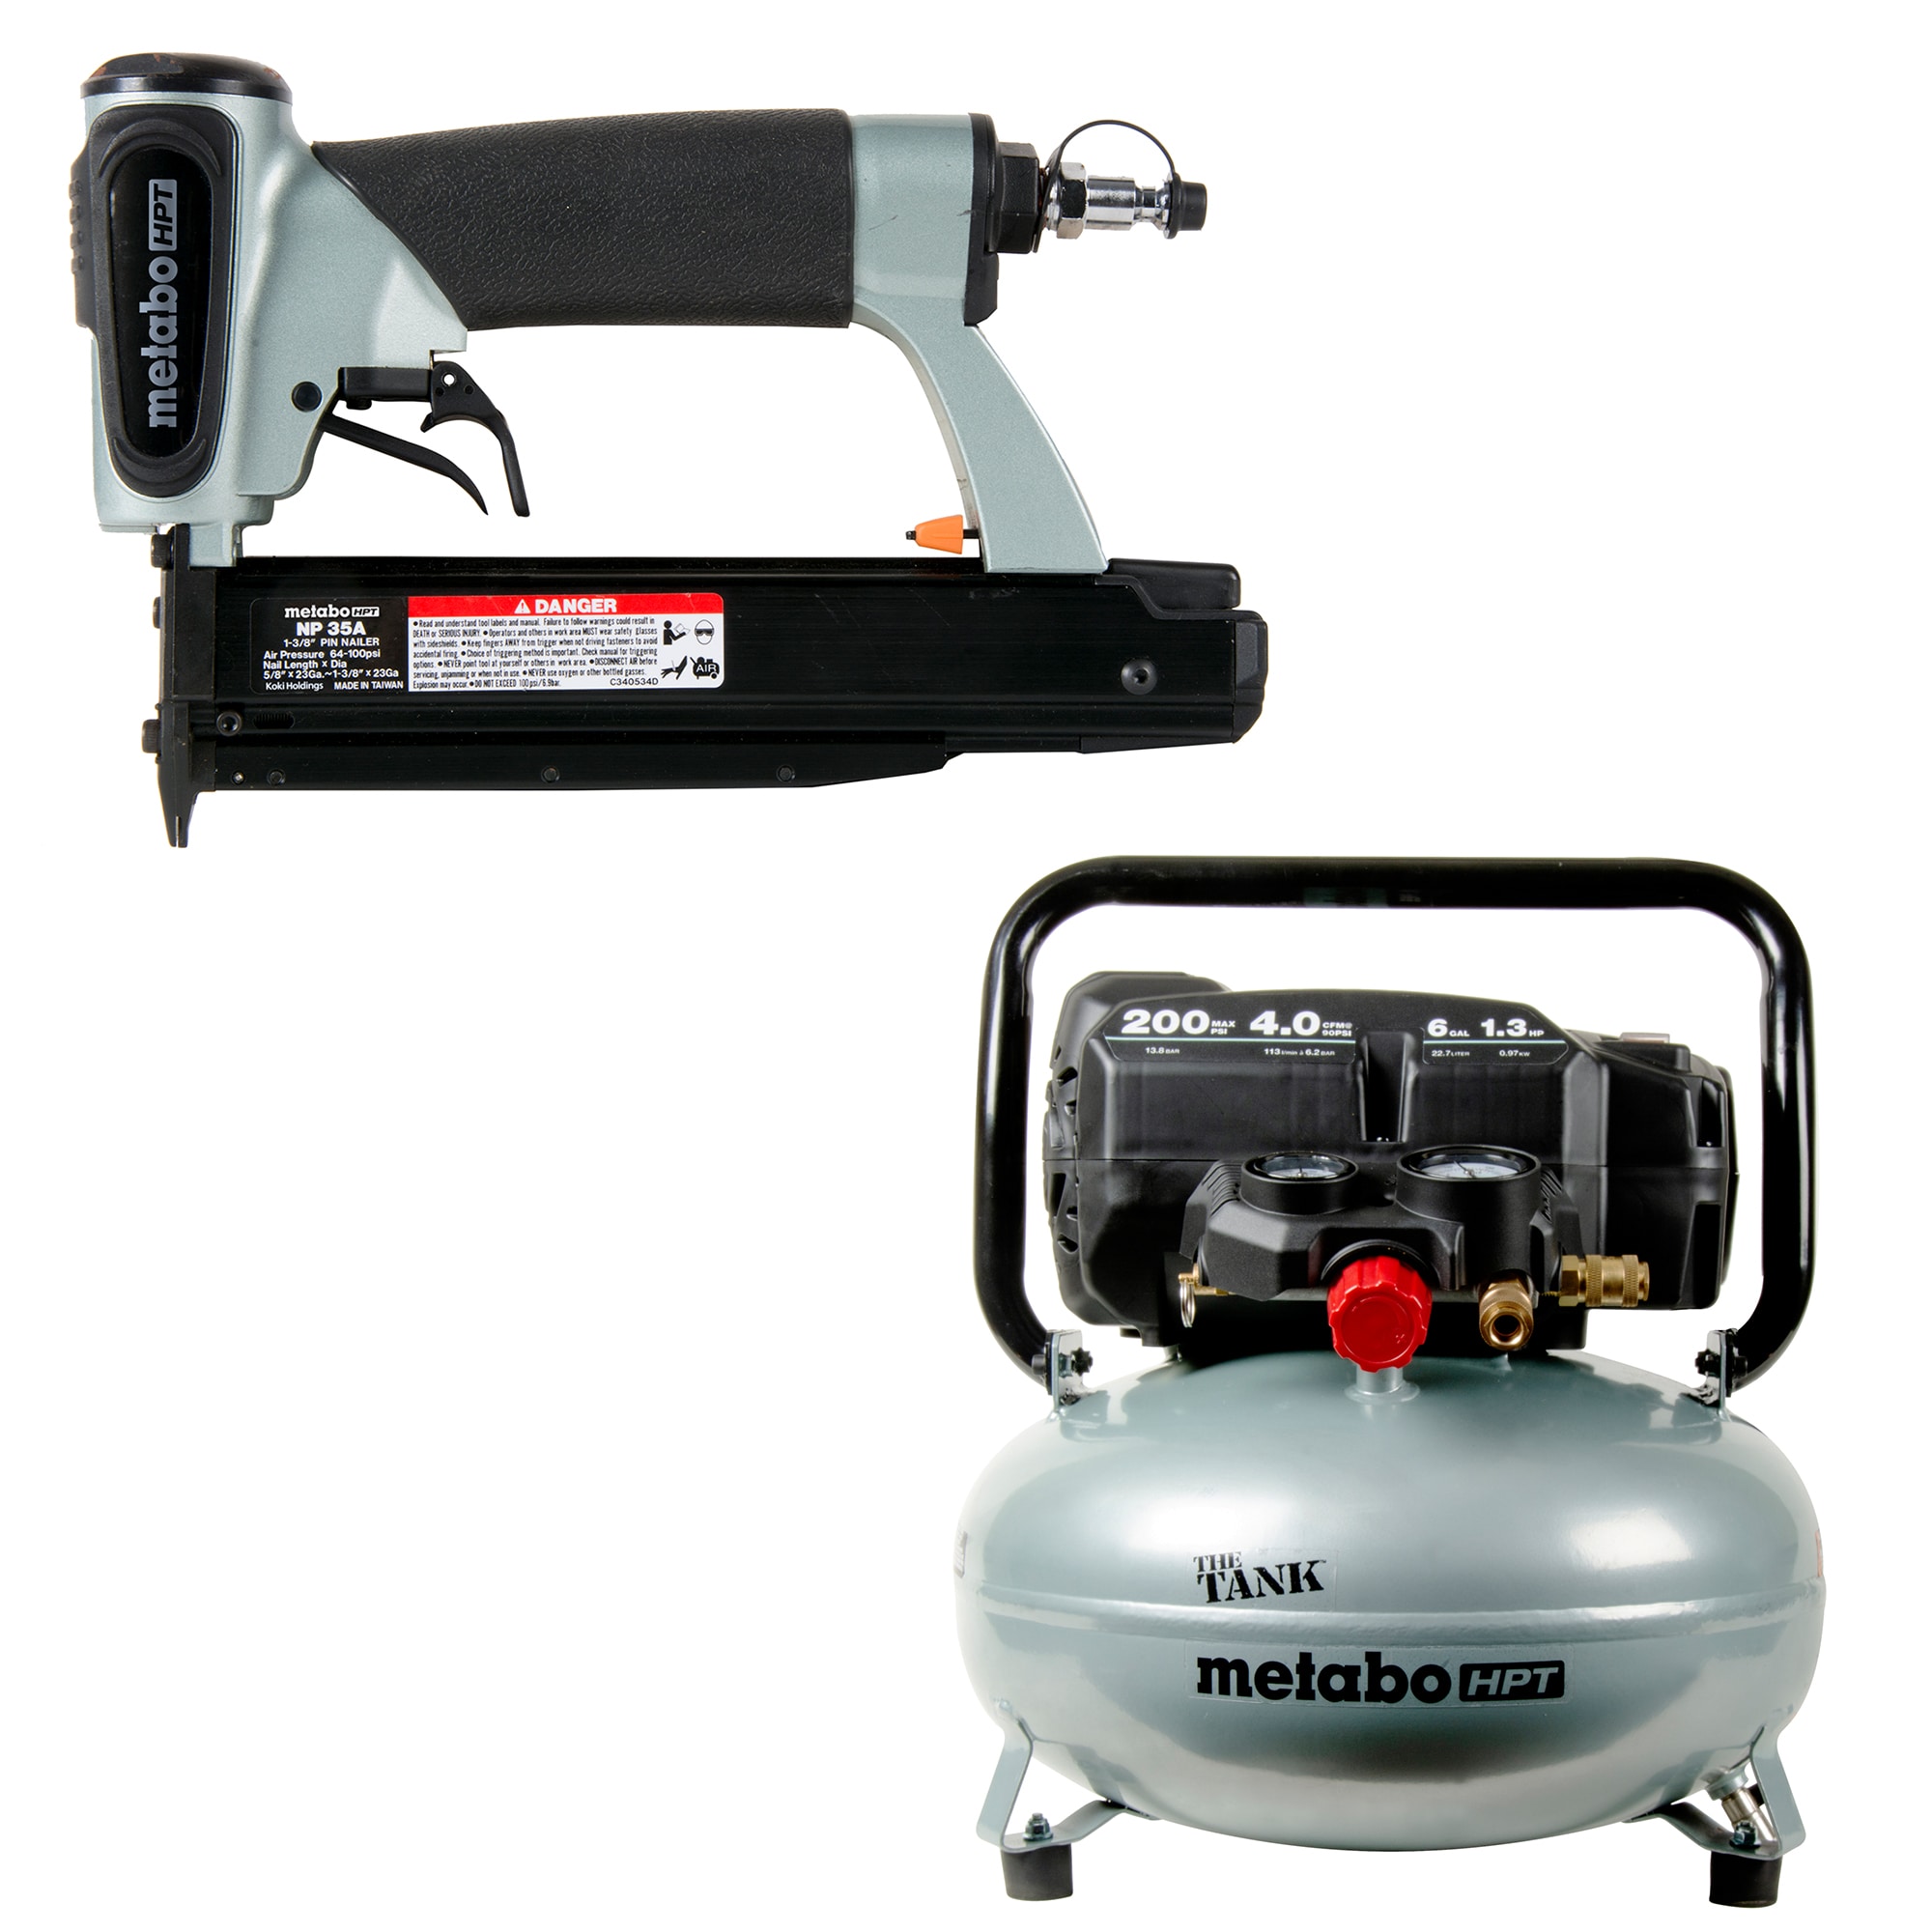 Metabo HPT 23-Gauge Pneumatic Pin Nailer with The Tank 6-Gallon Single Stage Portable Corded Electric Pancake Air Compressor